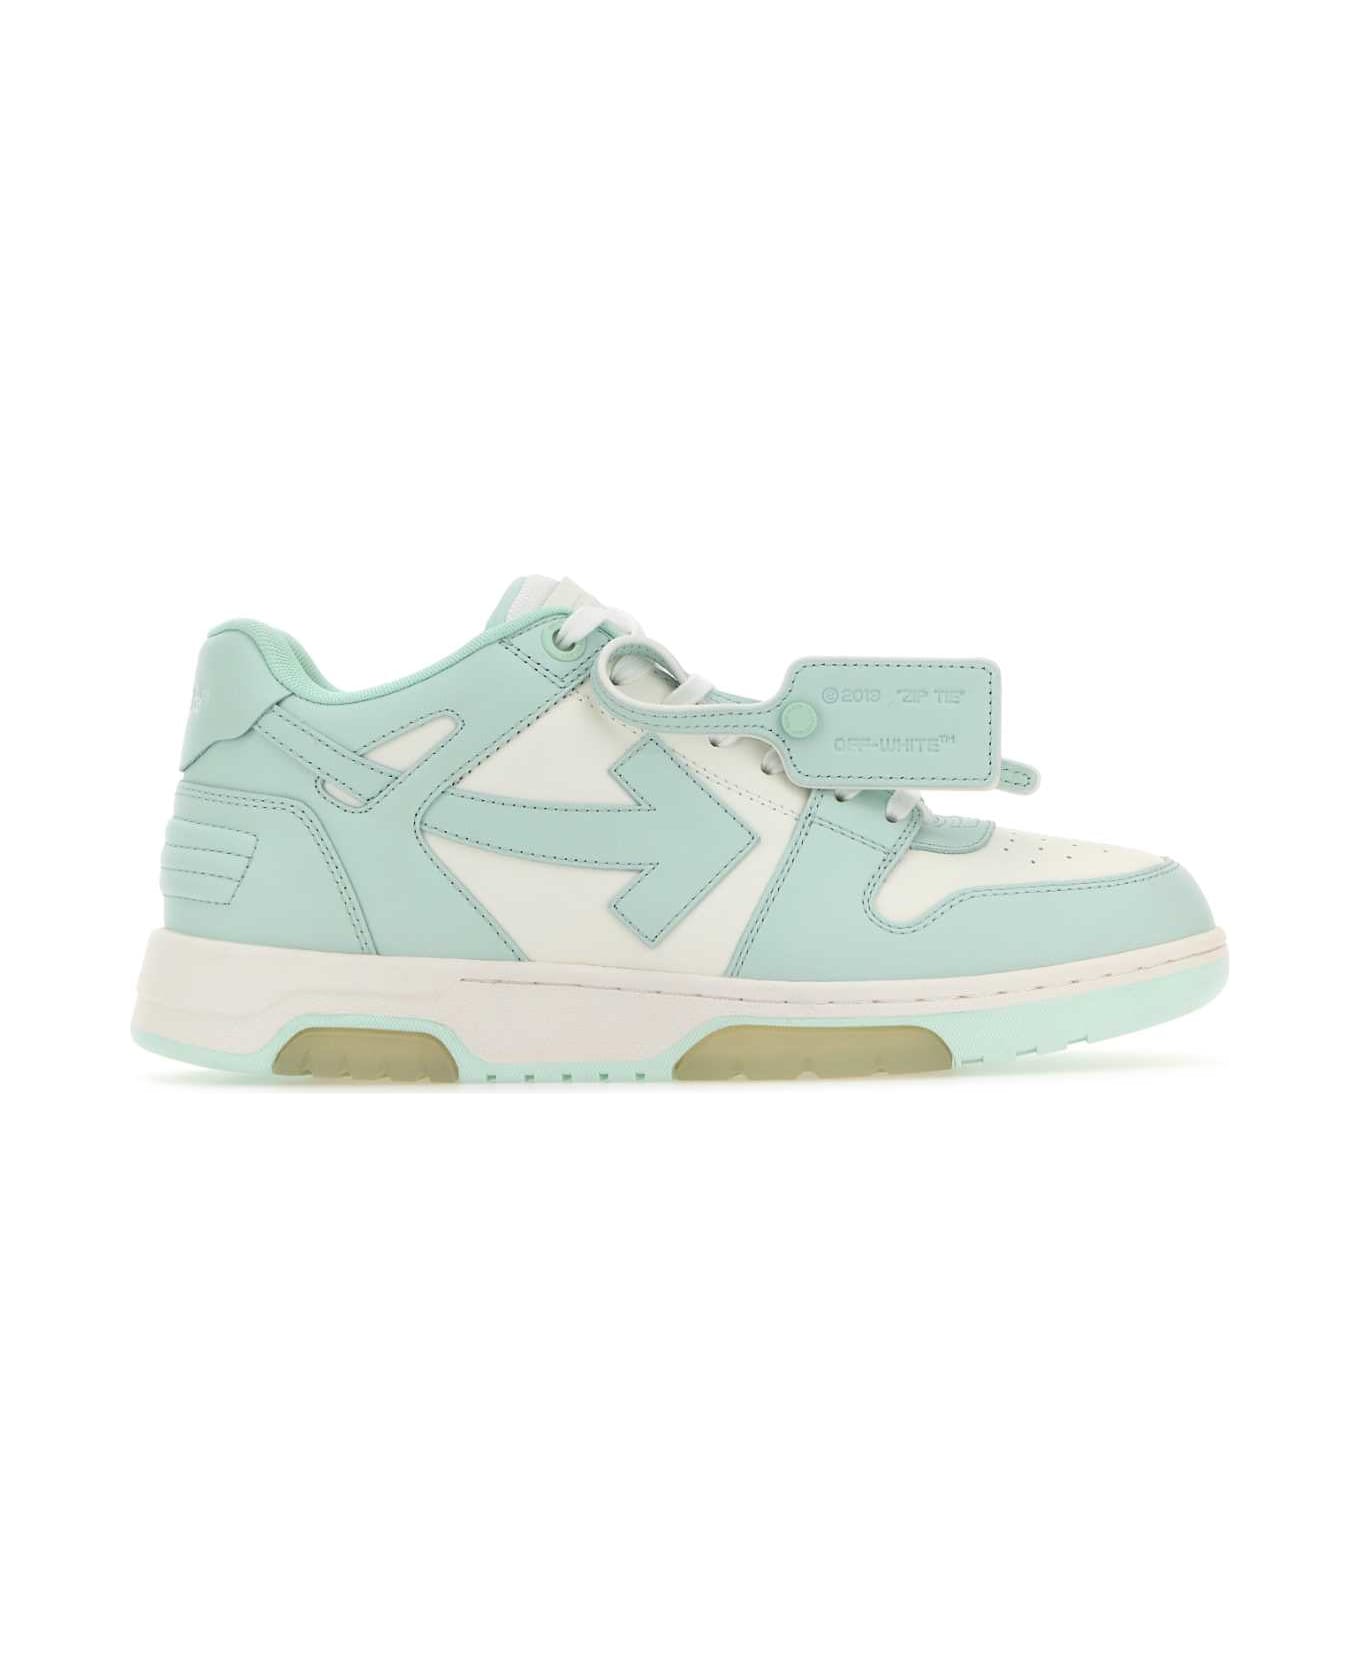 Off-White Two-tone Leather Out Of Office Sneakers - 0152 スニーカー